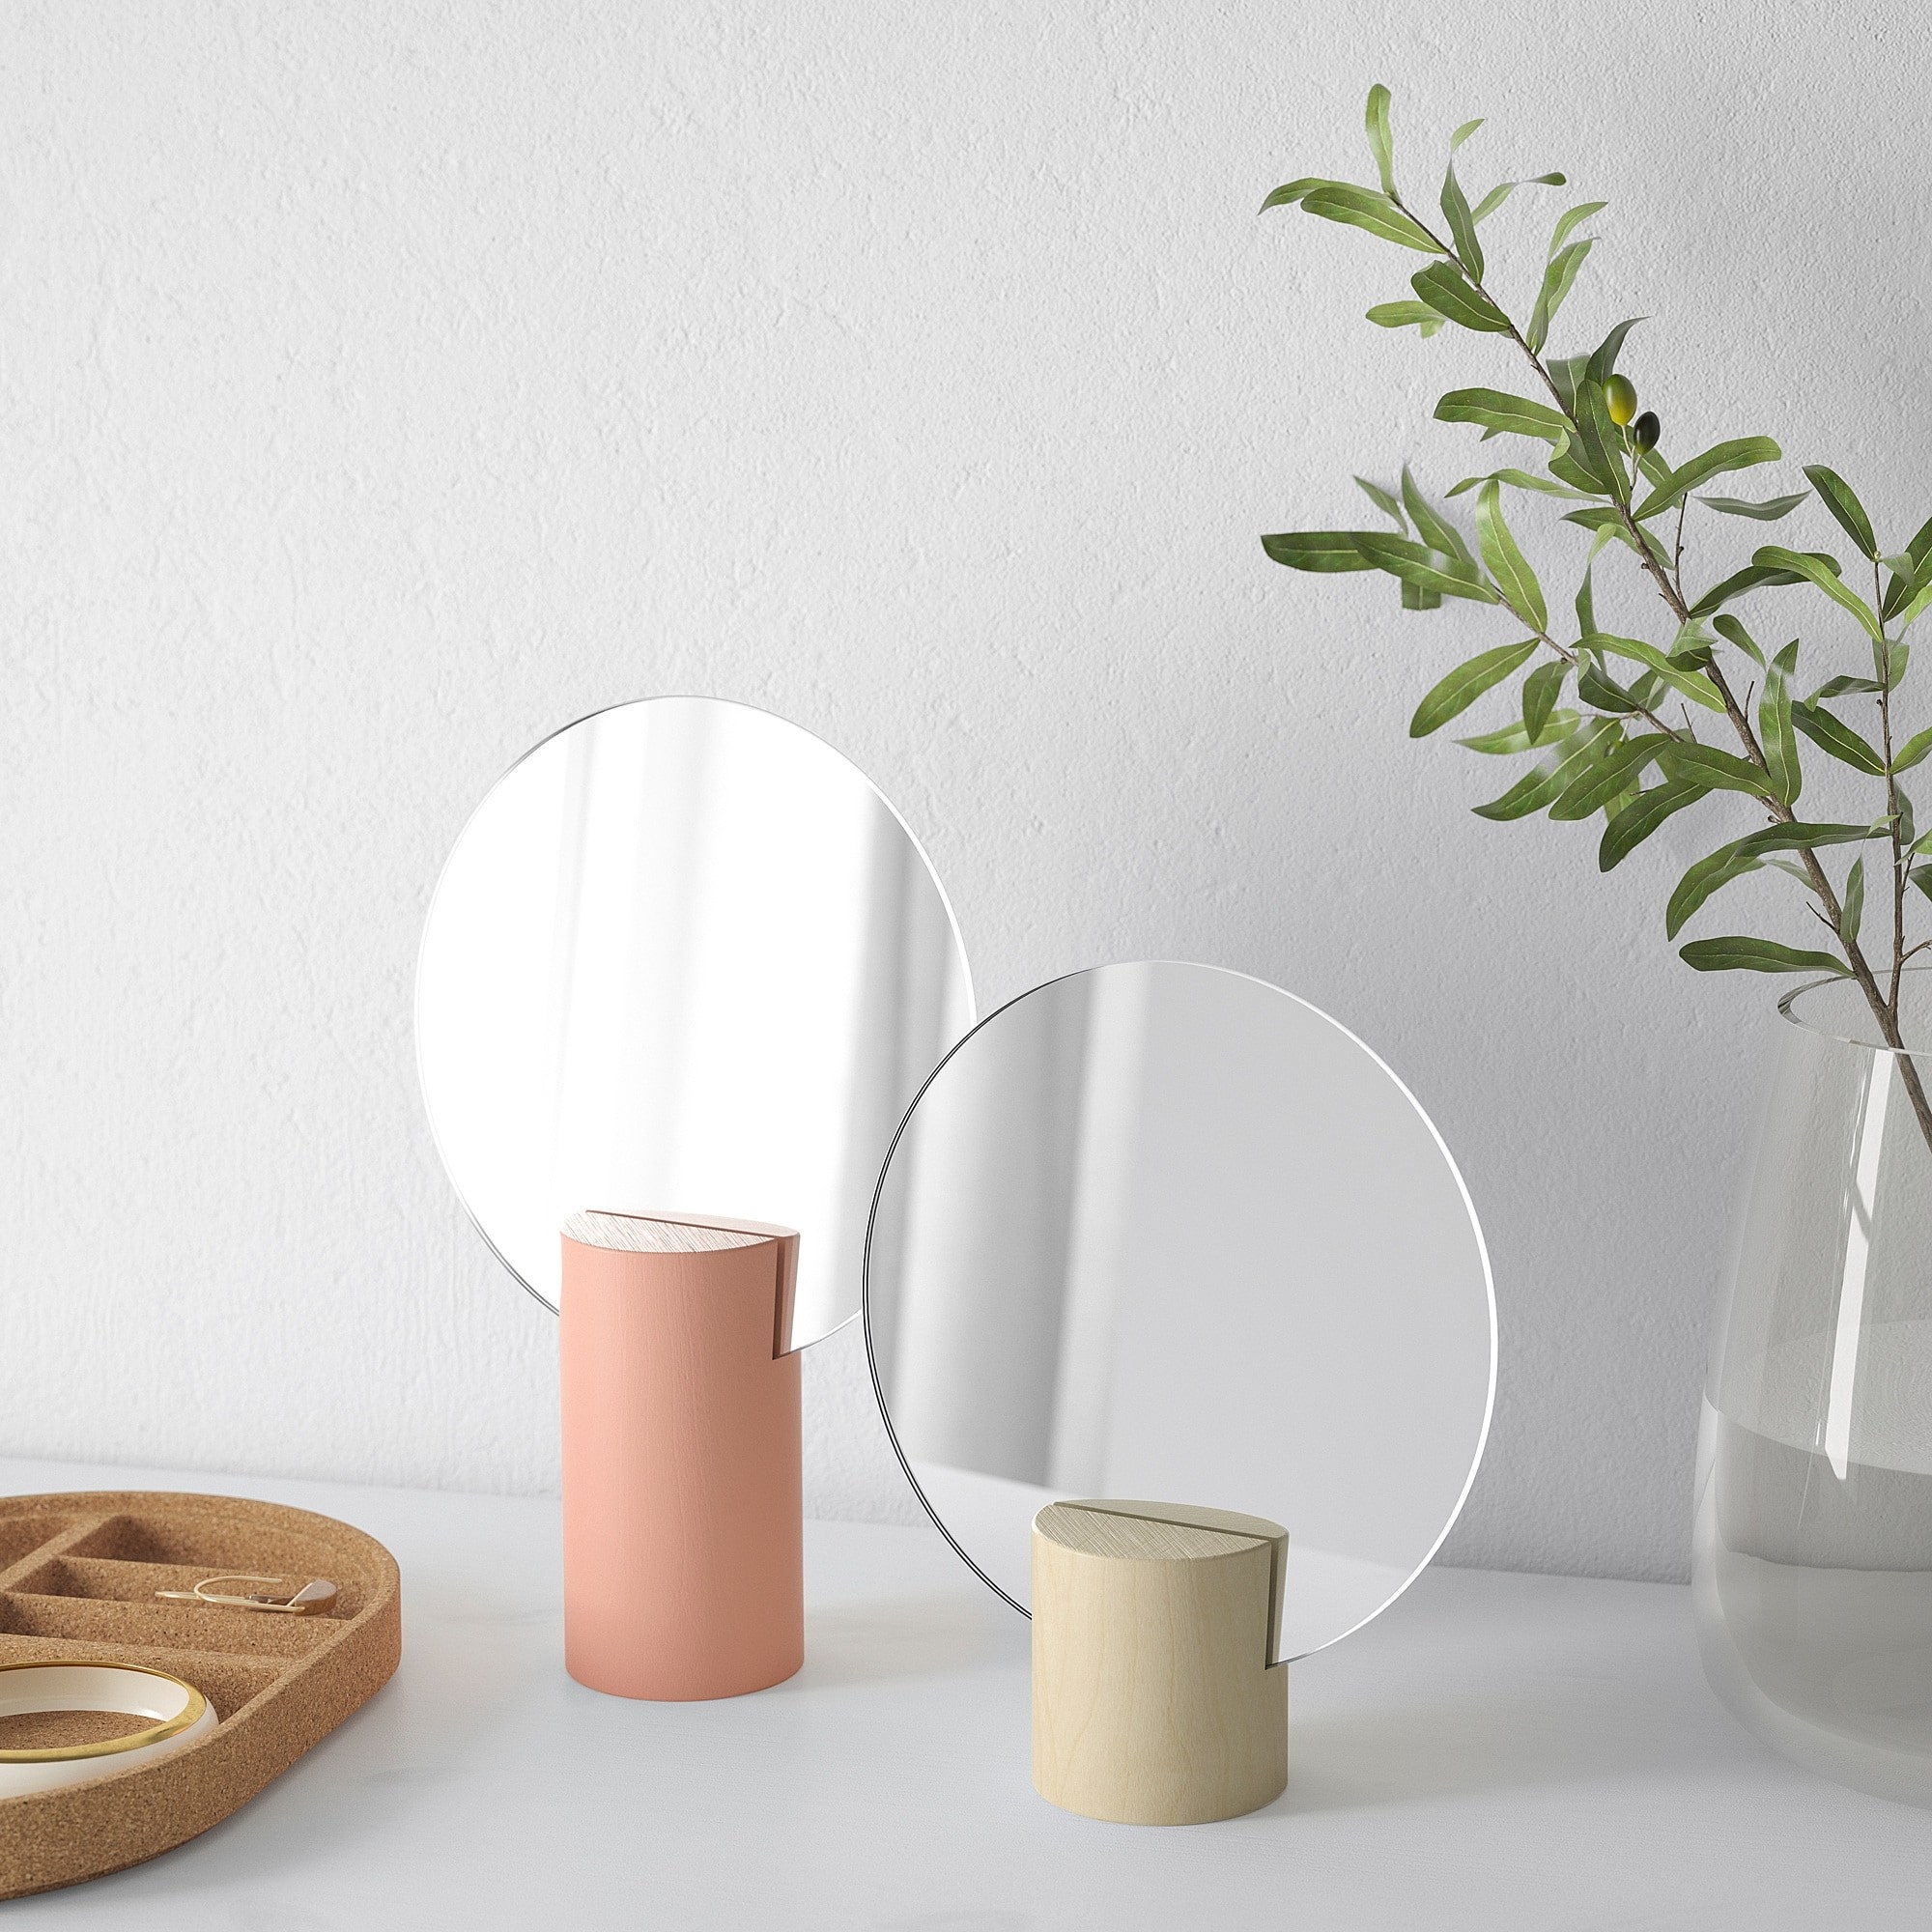 Two circular mirrors with wood bases in pink and beige